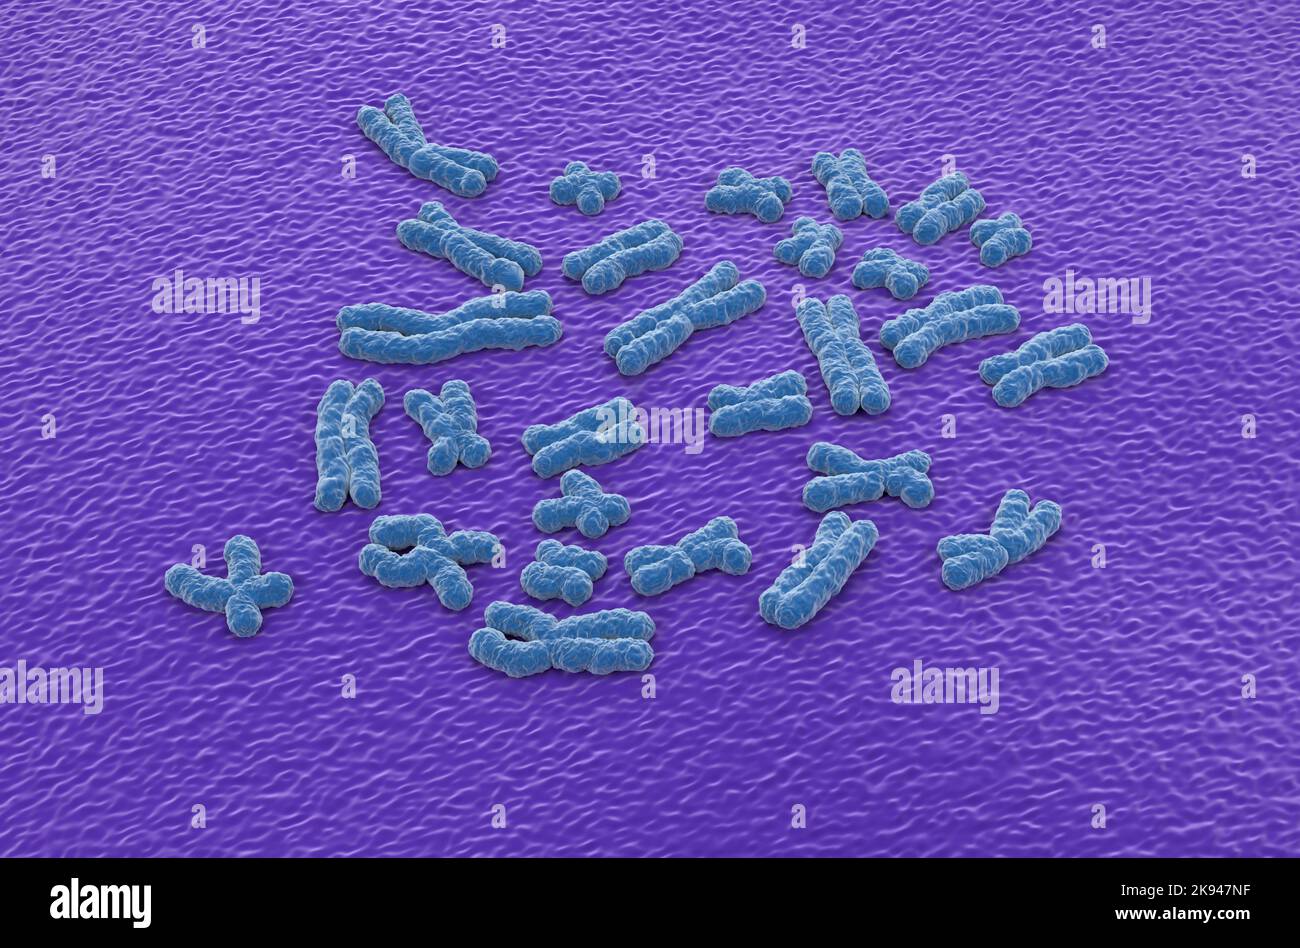 Human chromosomes (23 + X, Y) structures made of protein and a single molecule of DNA - isometric view 3d illustration Stock Photo